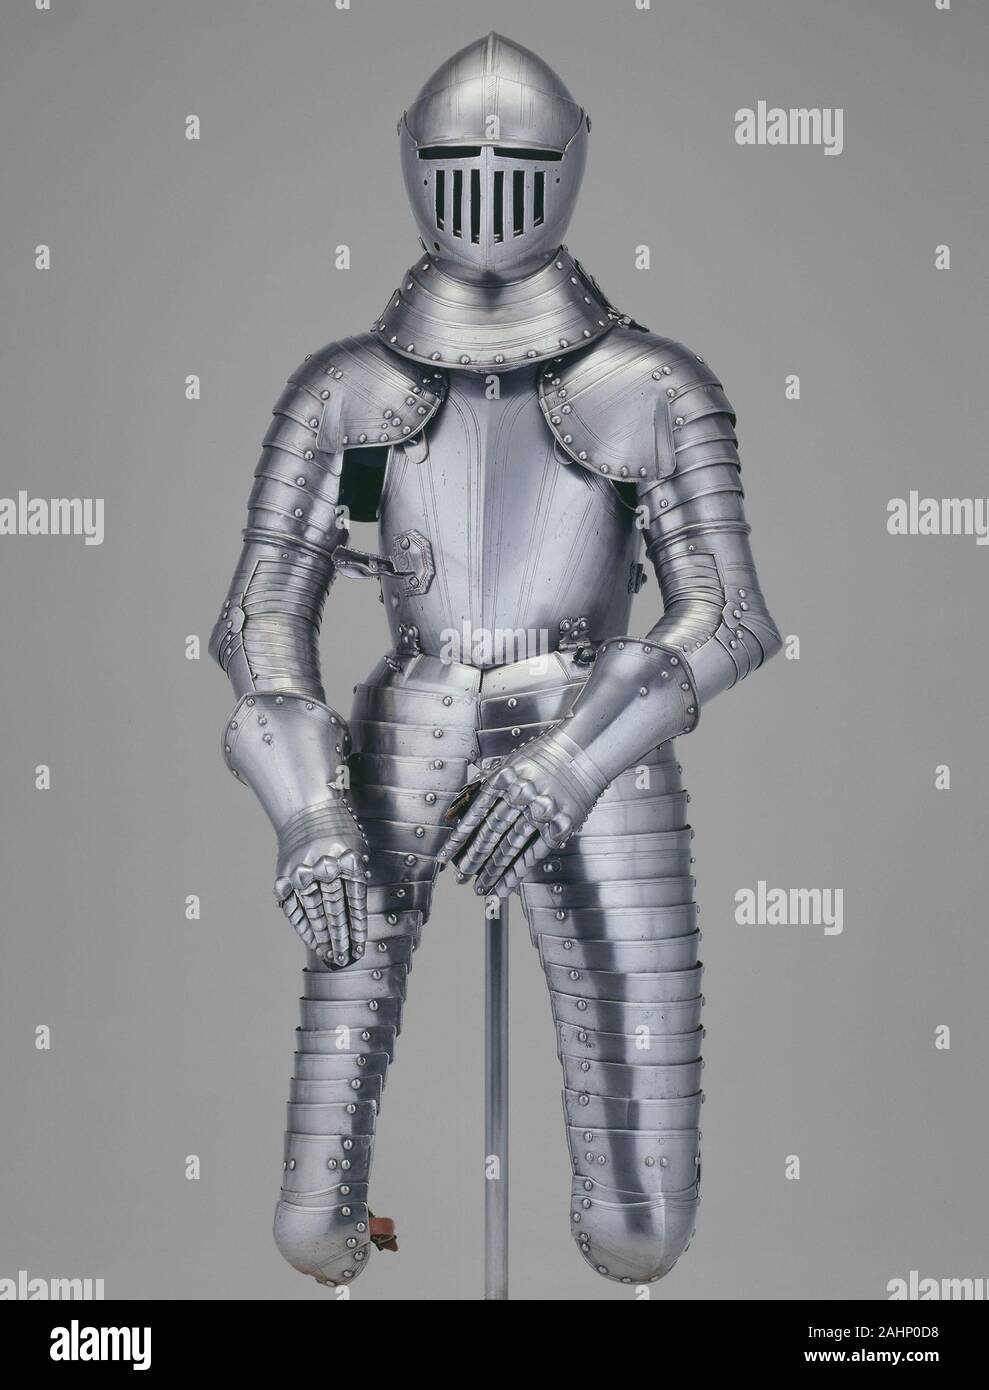 Armor for Heavy Calvary (Cuirassier). 1605–1615. Milan. Steel and leather This harness represents one of the last vestiges of fully armored cavalry, known as cuirassiers, trained to charge the enemy with a lance. By the 17th century firearms dominated the battlefield. In response to this development, the armorer of this piece made the breastplate and helmet thicker to resist the impact of musket fire. The dent on the breastplate, visible under the right arm, is a proof mark made when the armorer fired a musket at the piece to guarantee to his client that the armor was indeed shot-proof. Remark Stock Photo